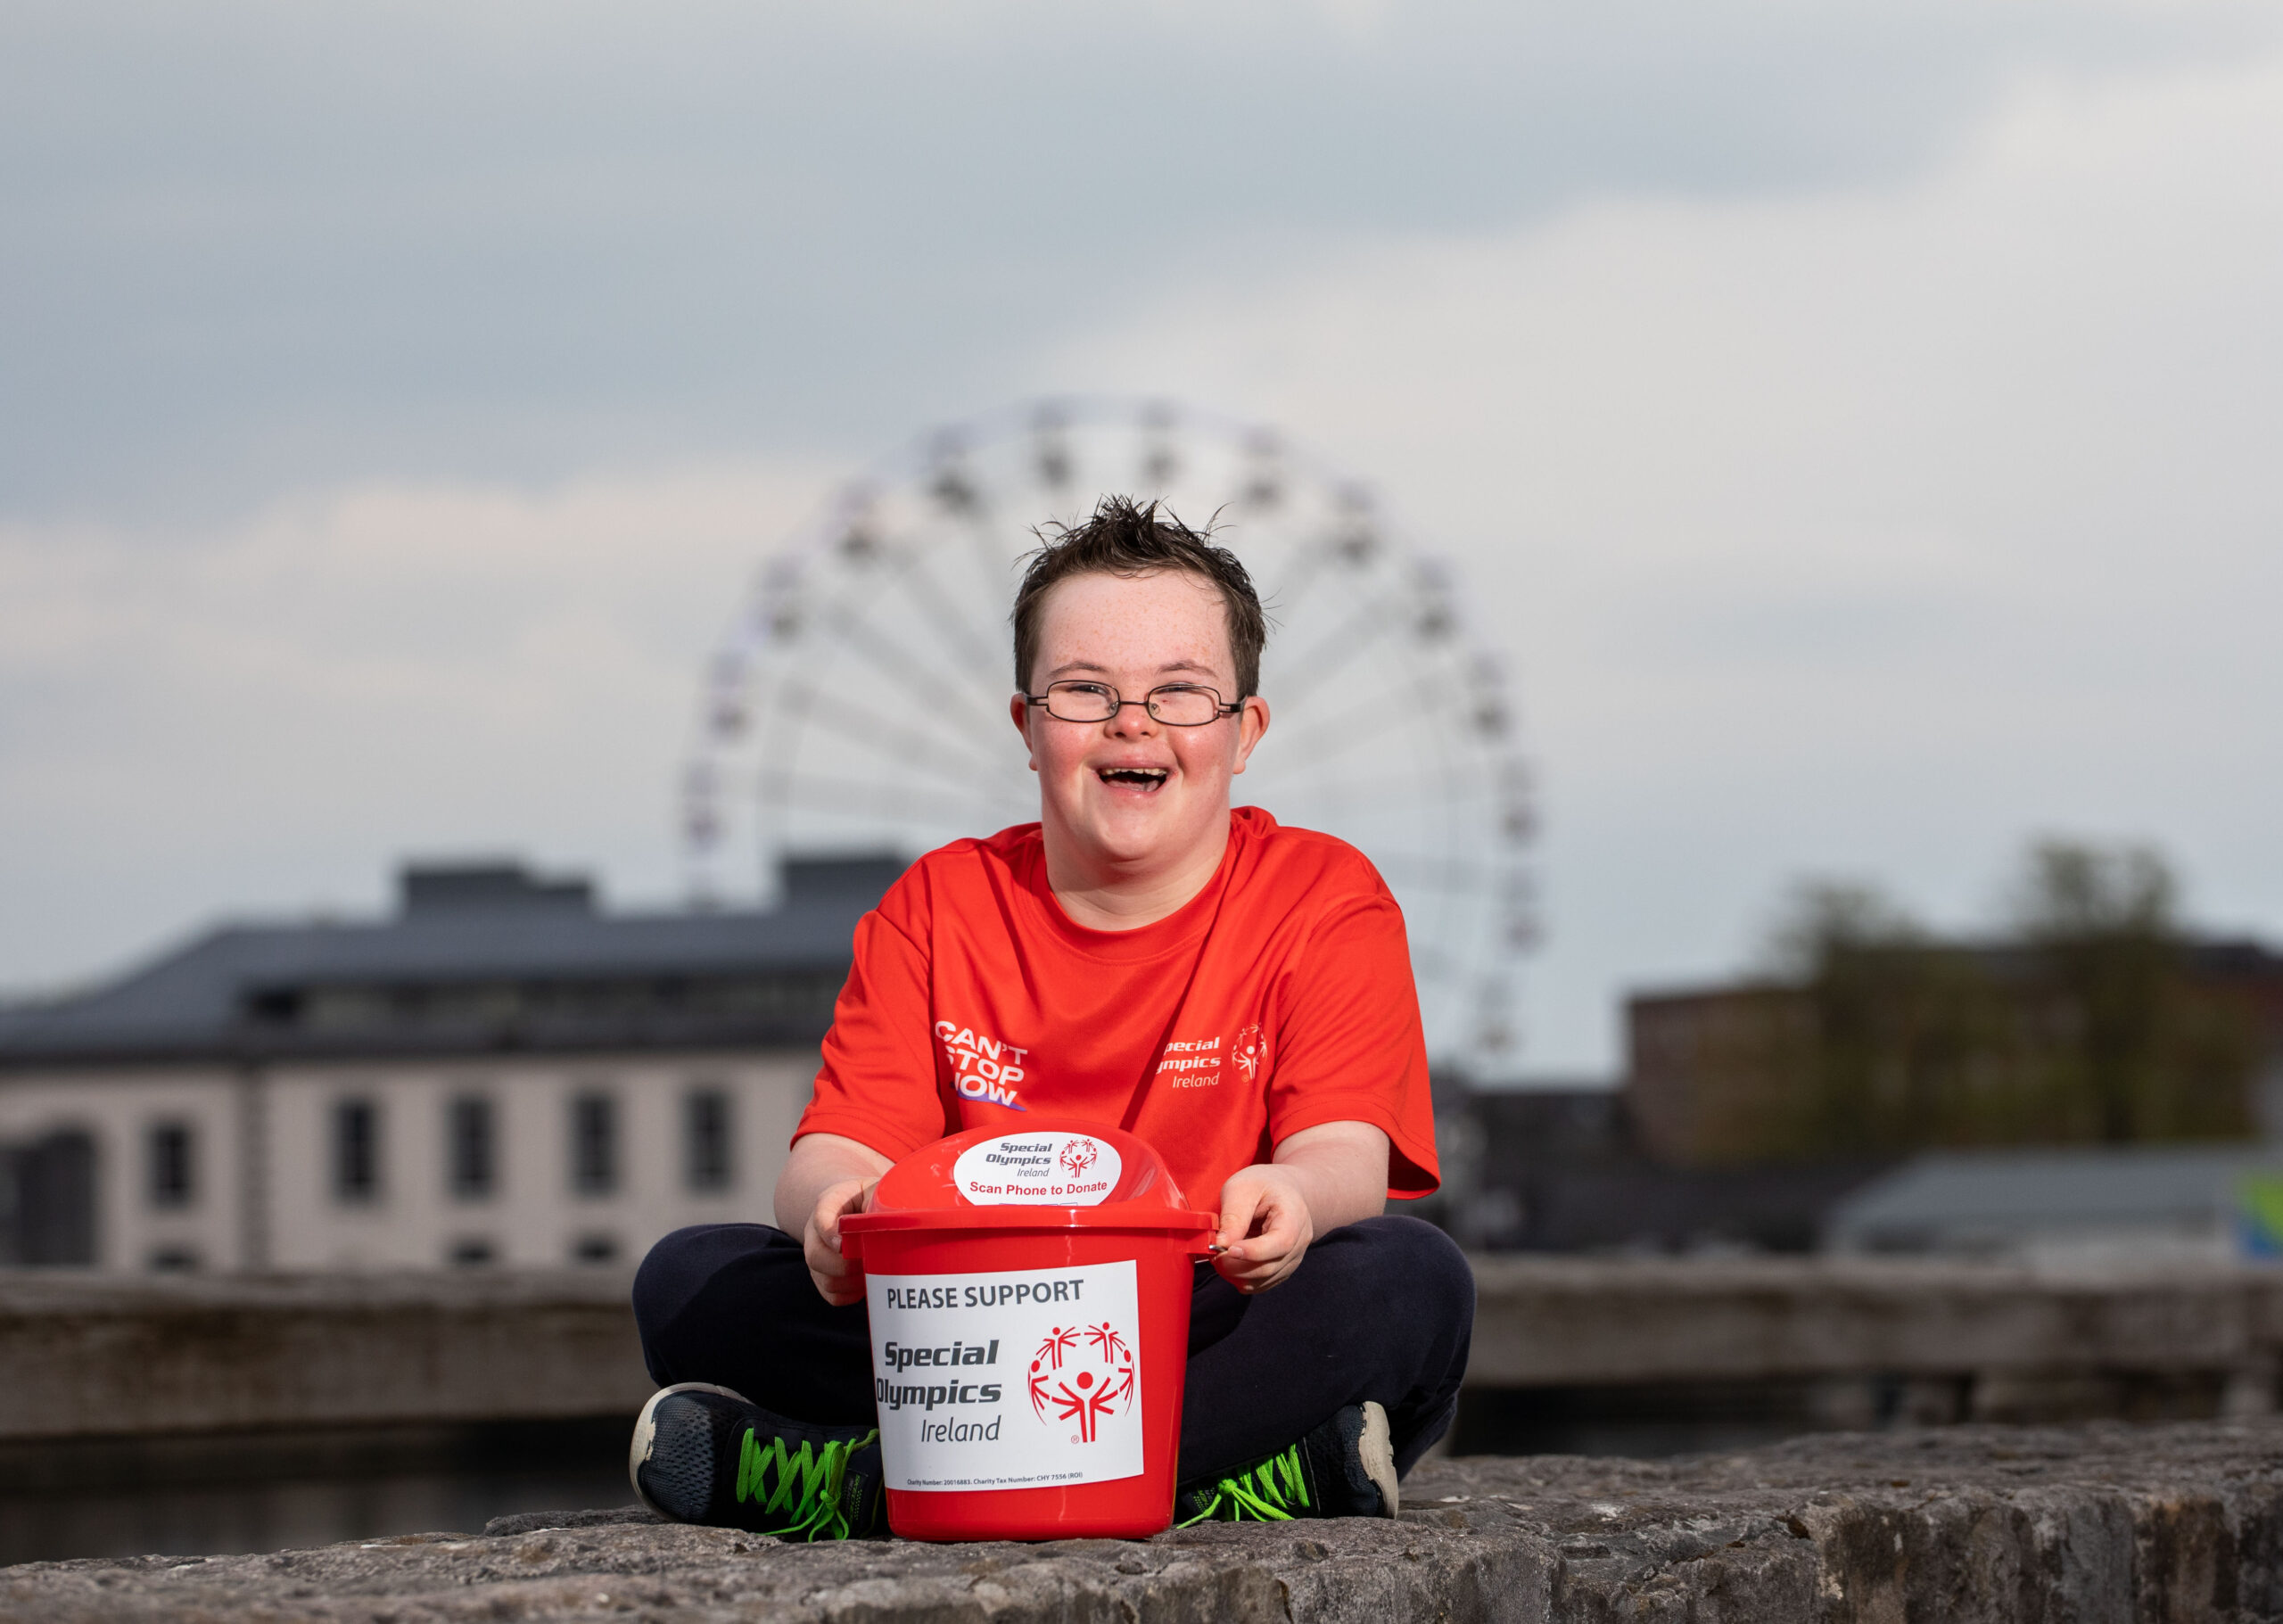 Special Olympics Collection Day - Padraig O'Callaghan, recently named Limerick Person of the Year, is backing Special Olympics Annual Collection Day taking place Friday 29th April and is asking you to show your support by making a donation to their on-street collectors shaking buckets across Limerick or visit specialolympics.ie. Picture: Alan Place